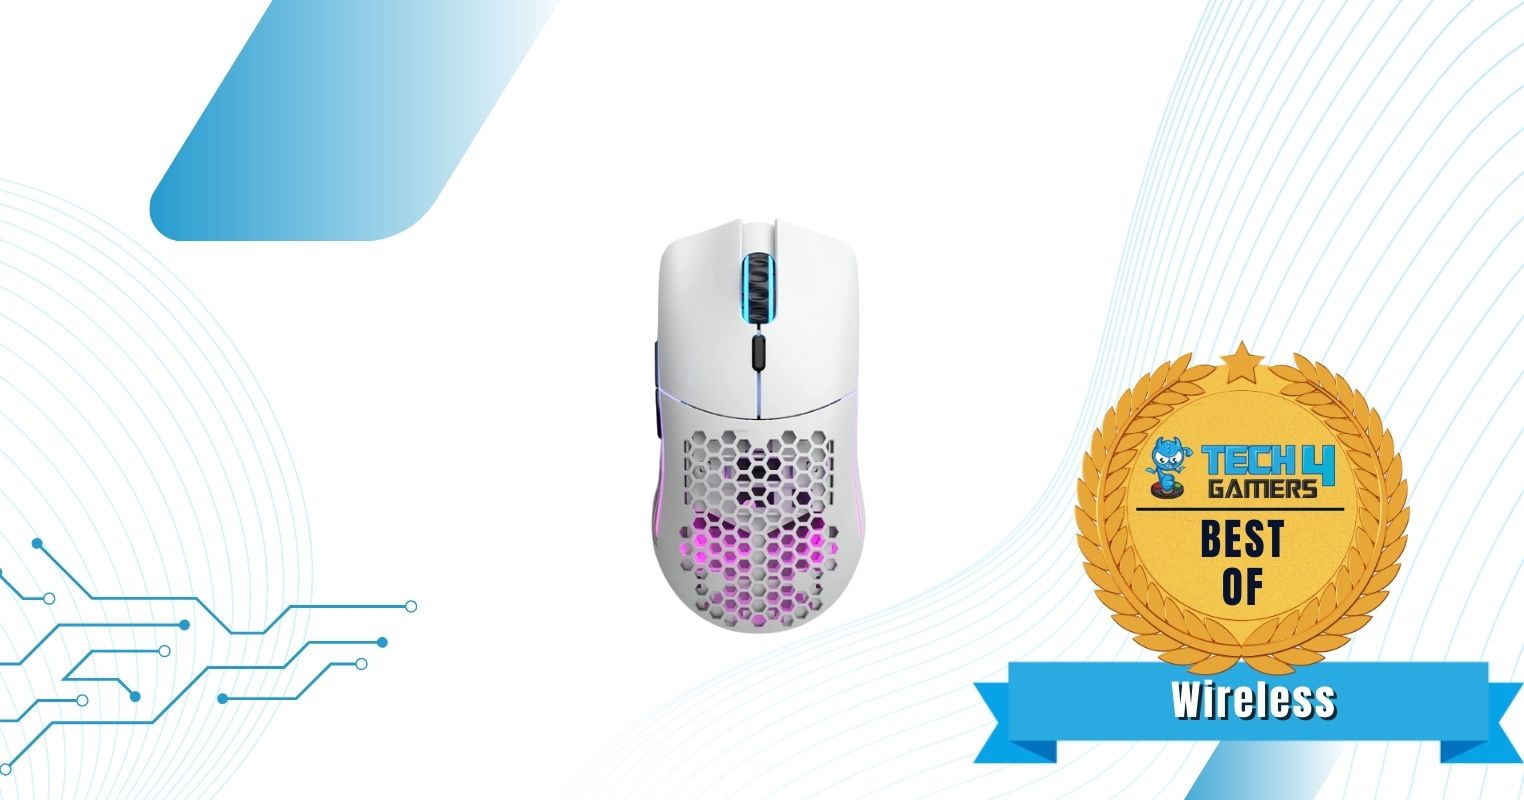 Glorious Model O Wireless - Best Wireless Drag Clicking Mouse